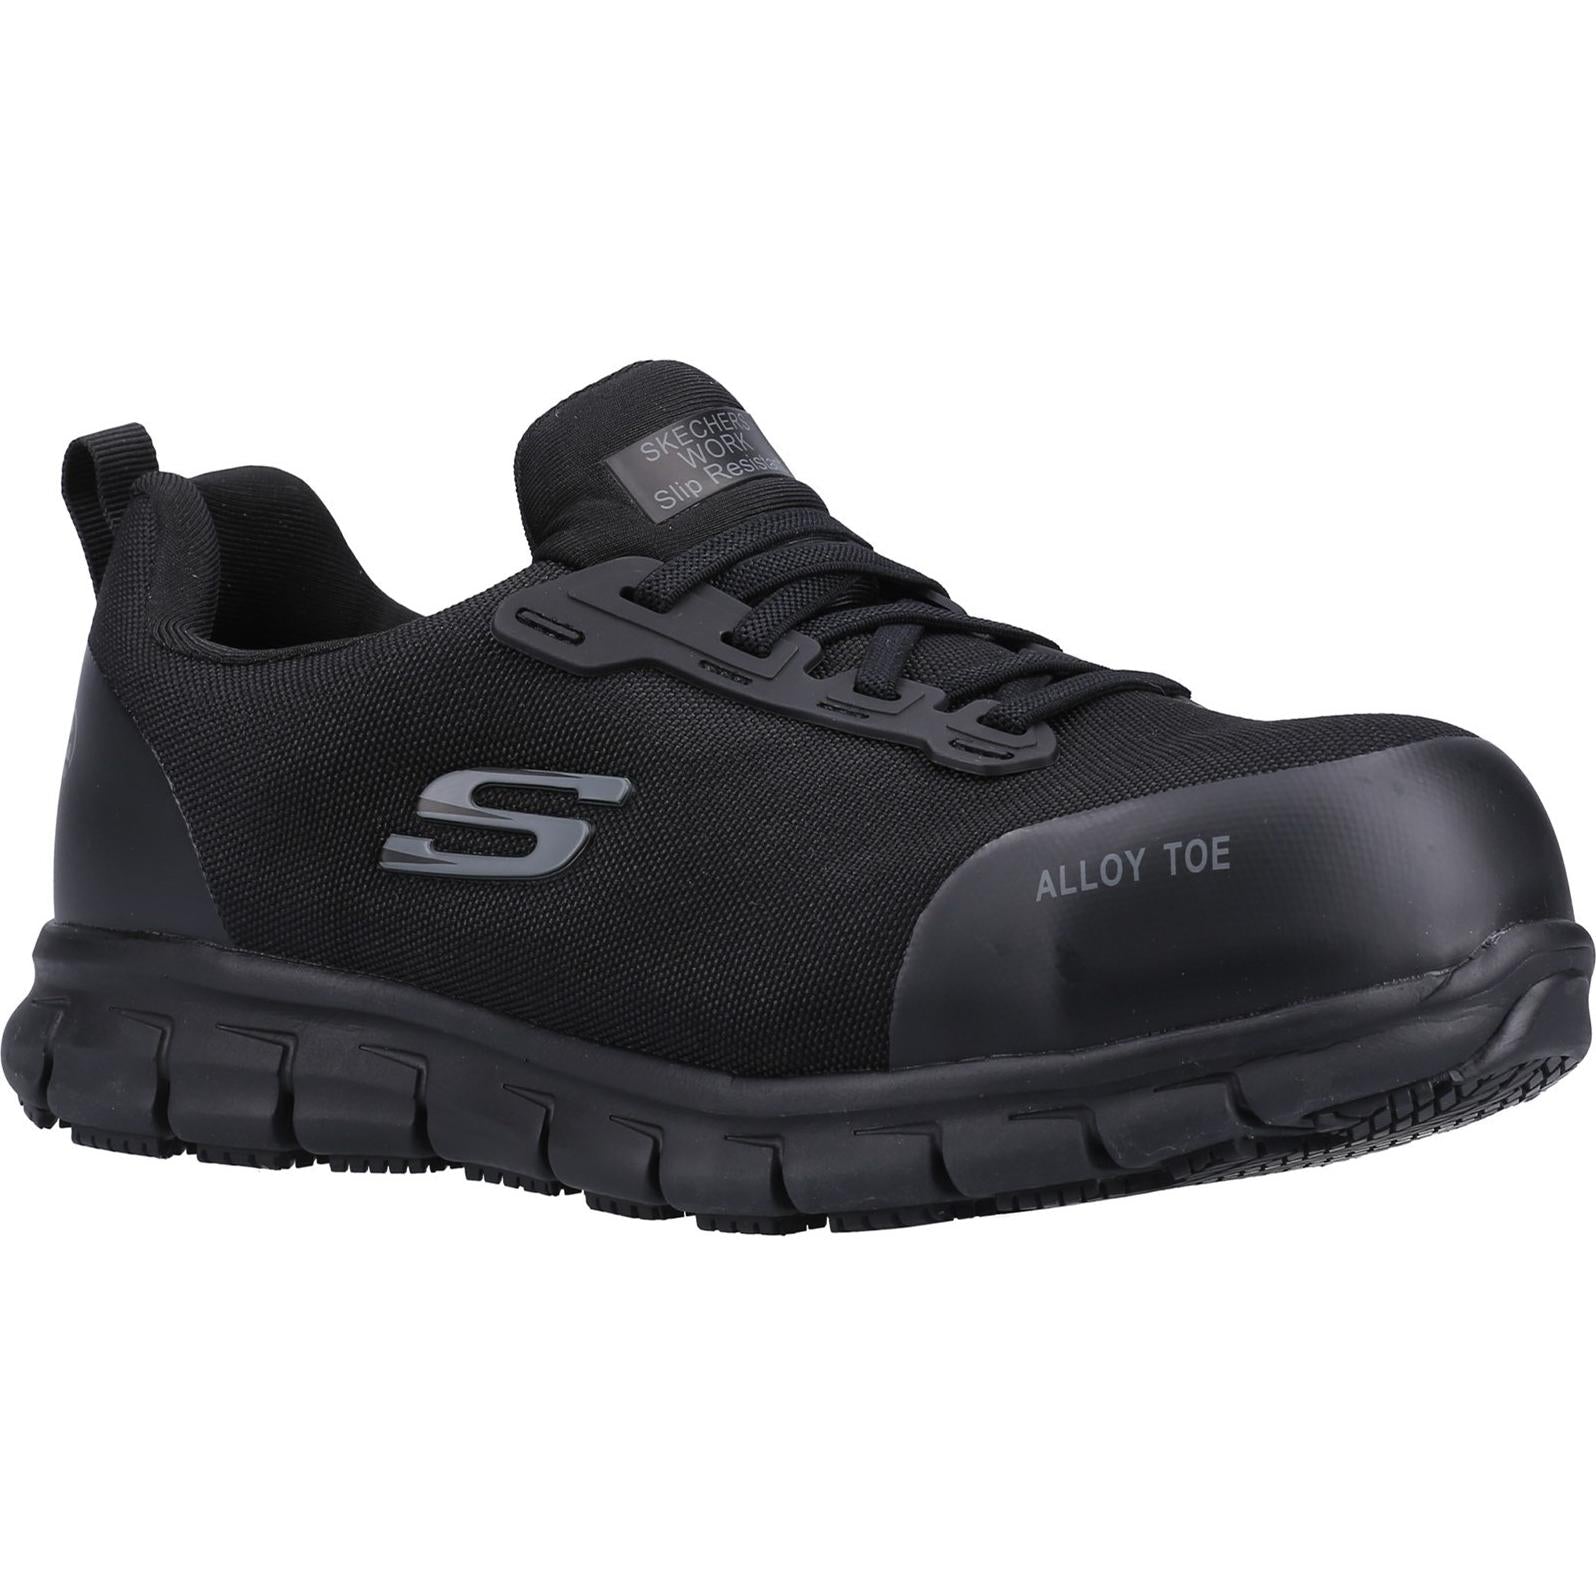 Skechers Sure Track Jixie Safety Shoes